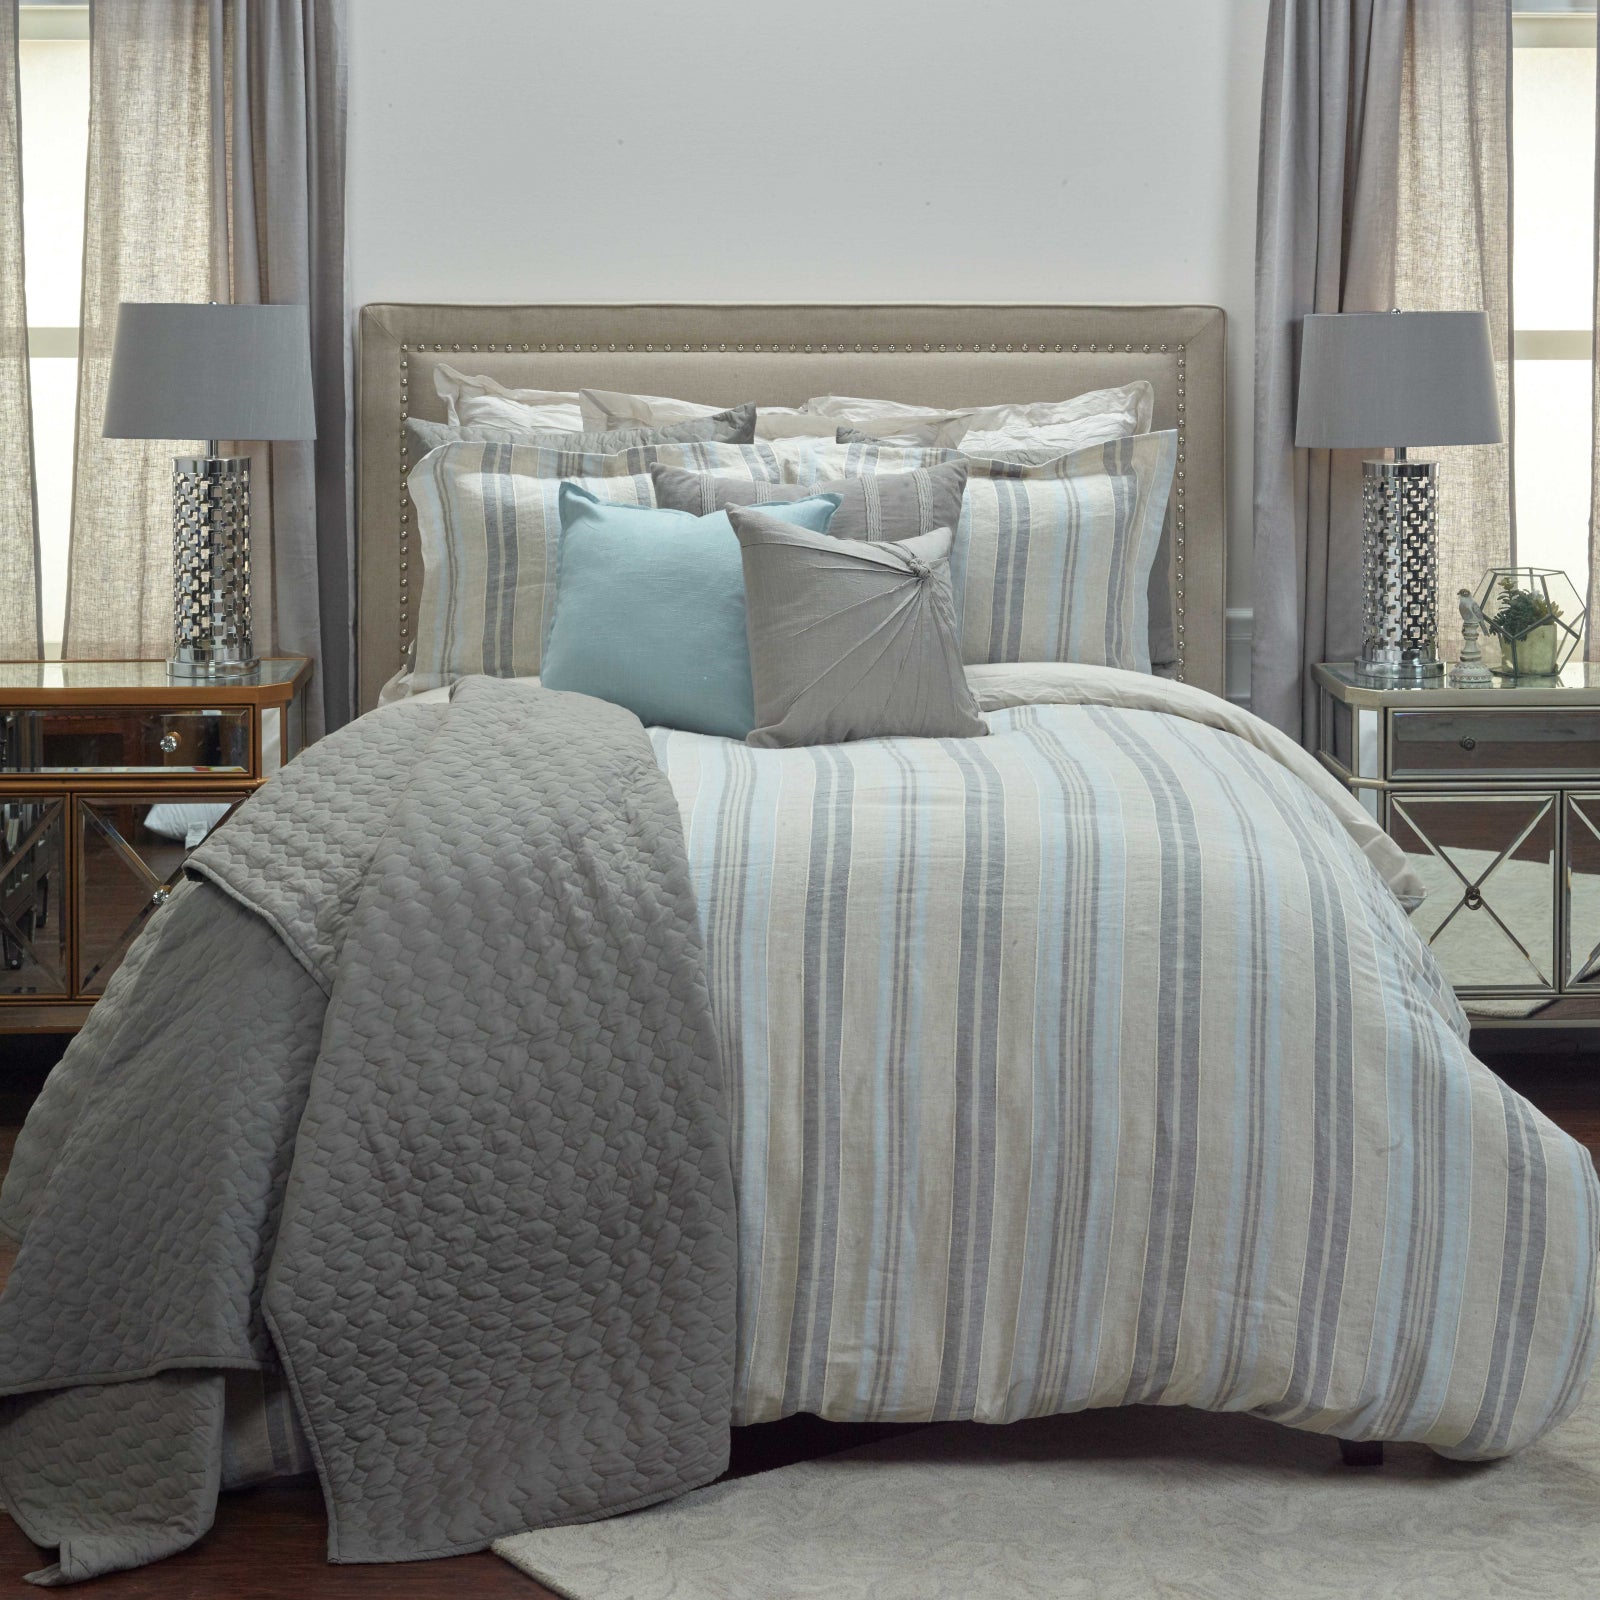 Rizzy BT4229 Terrance Natural Bedding main image